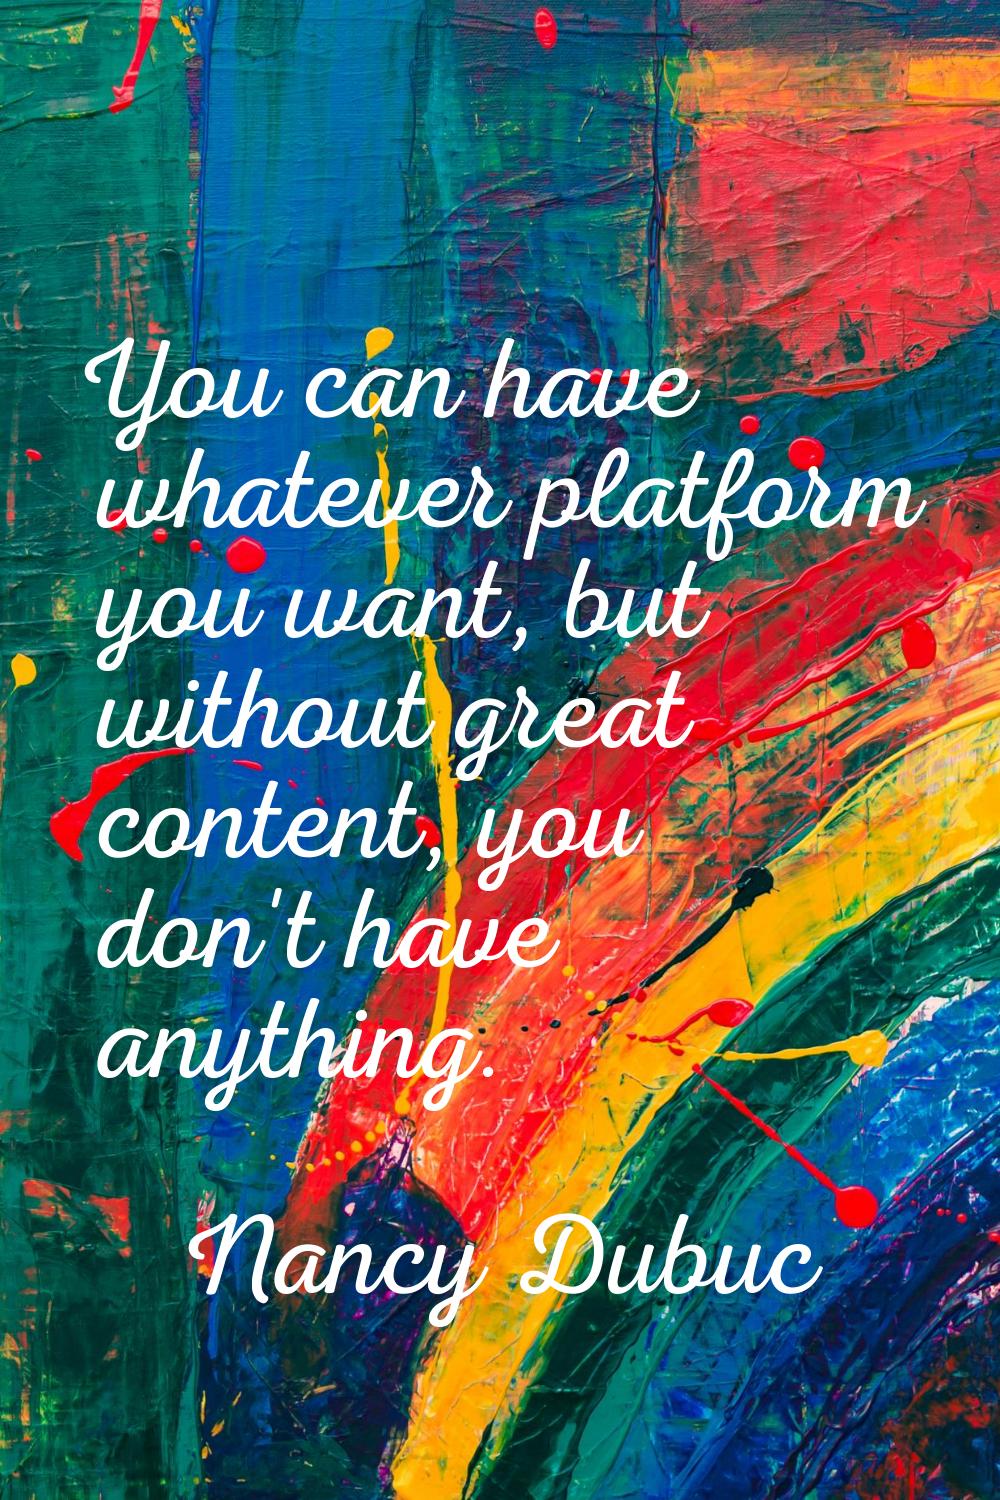 You can have whatever platform you want, but without great content, you don't have anything.